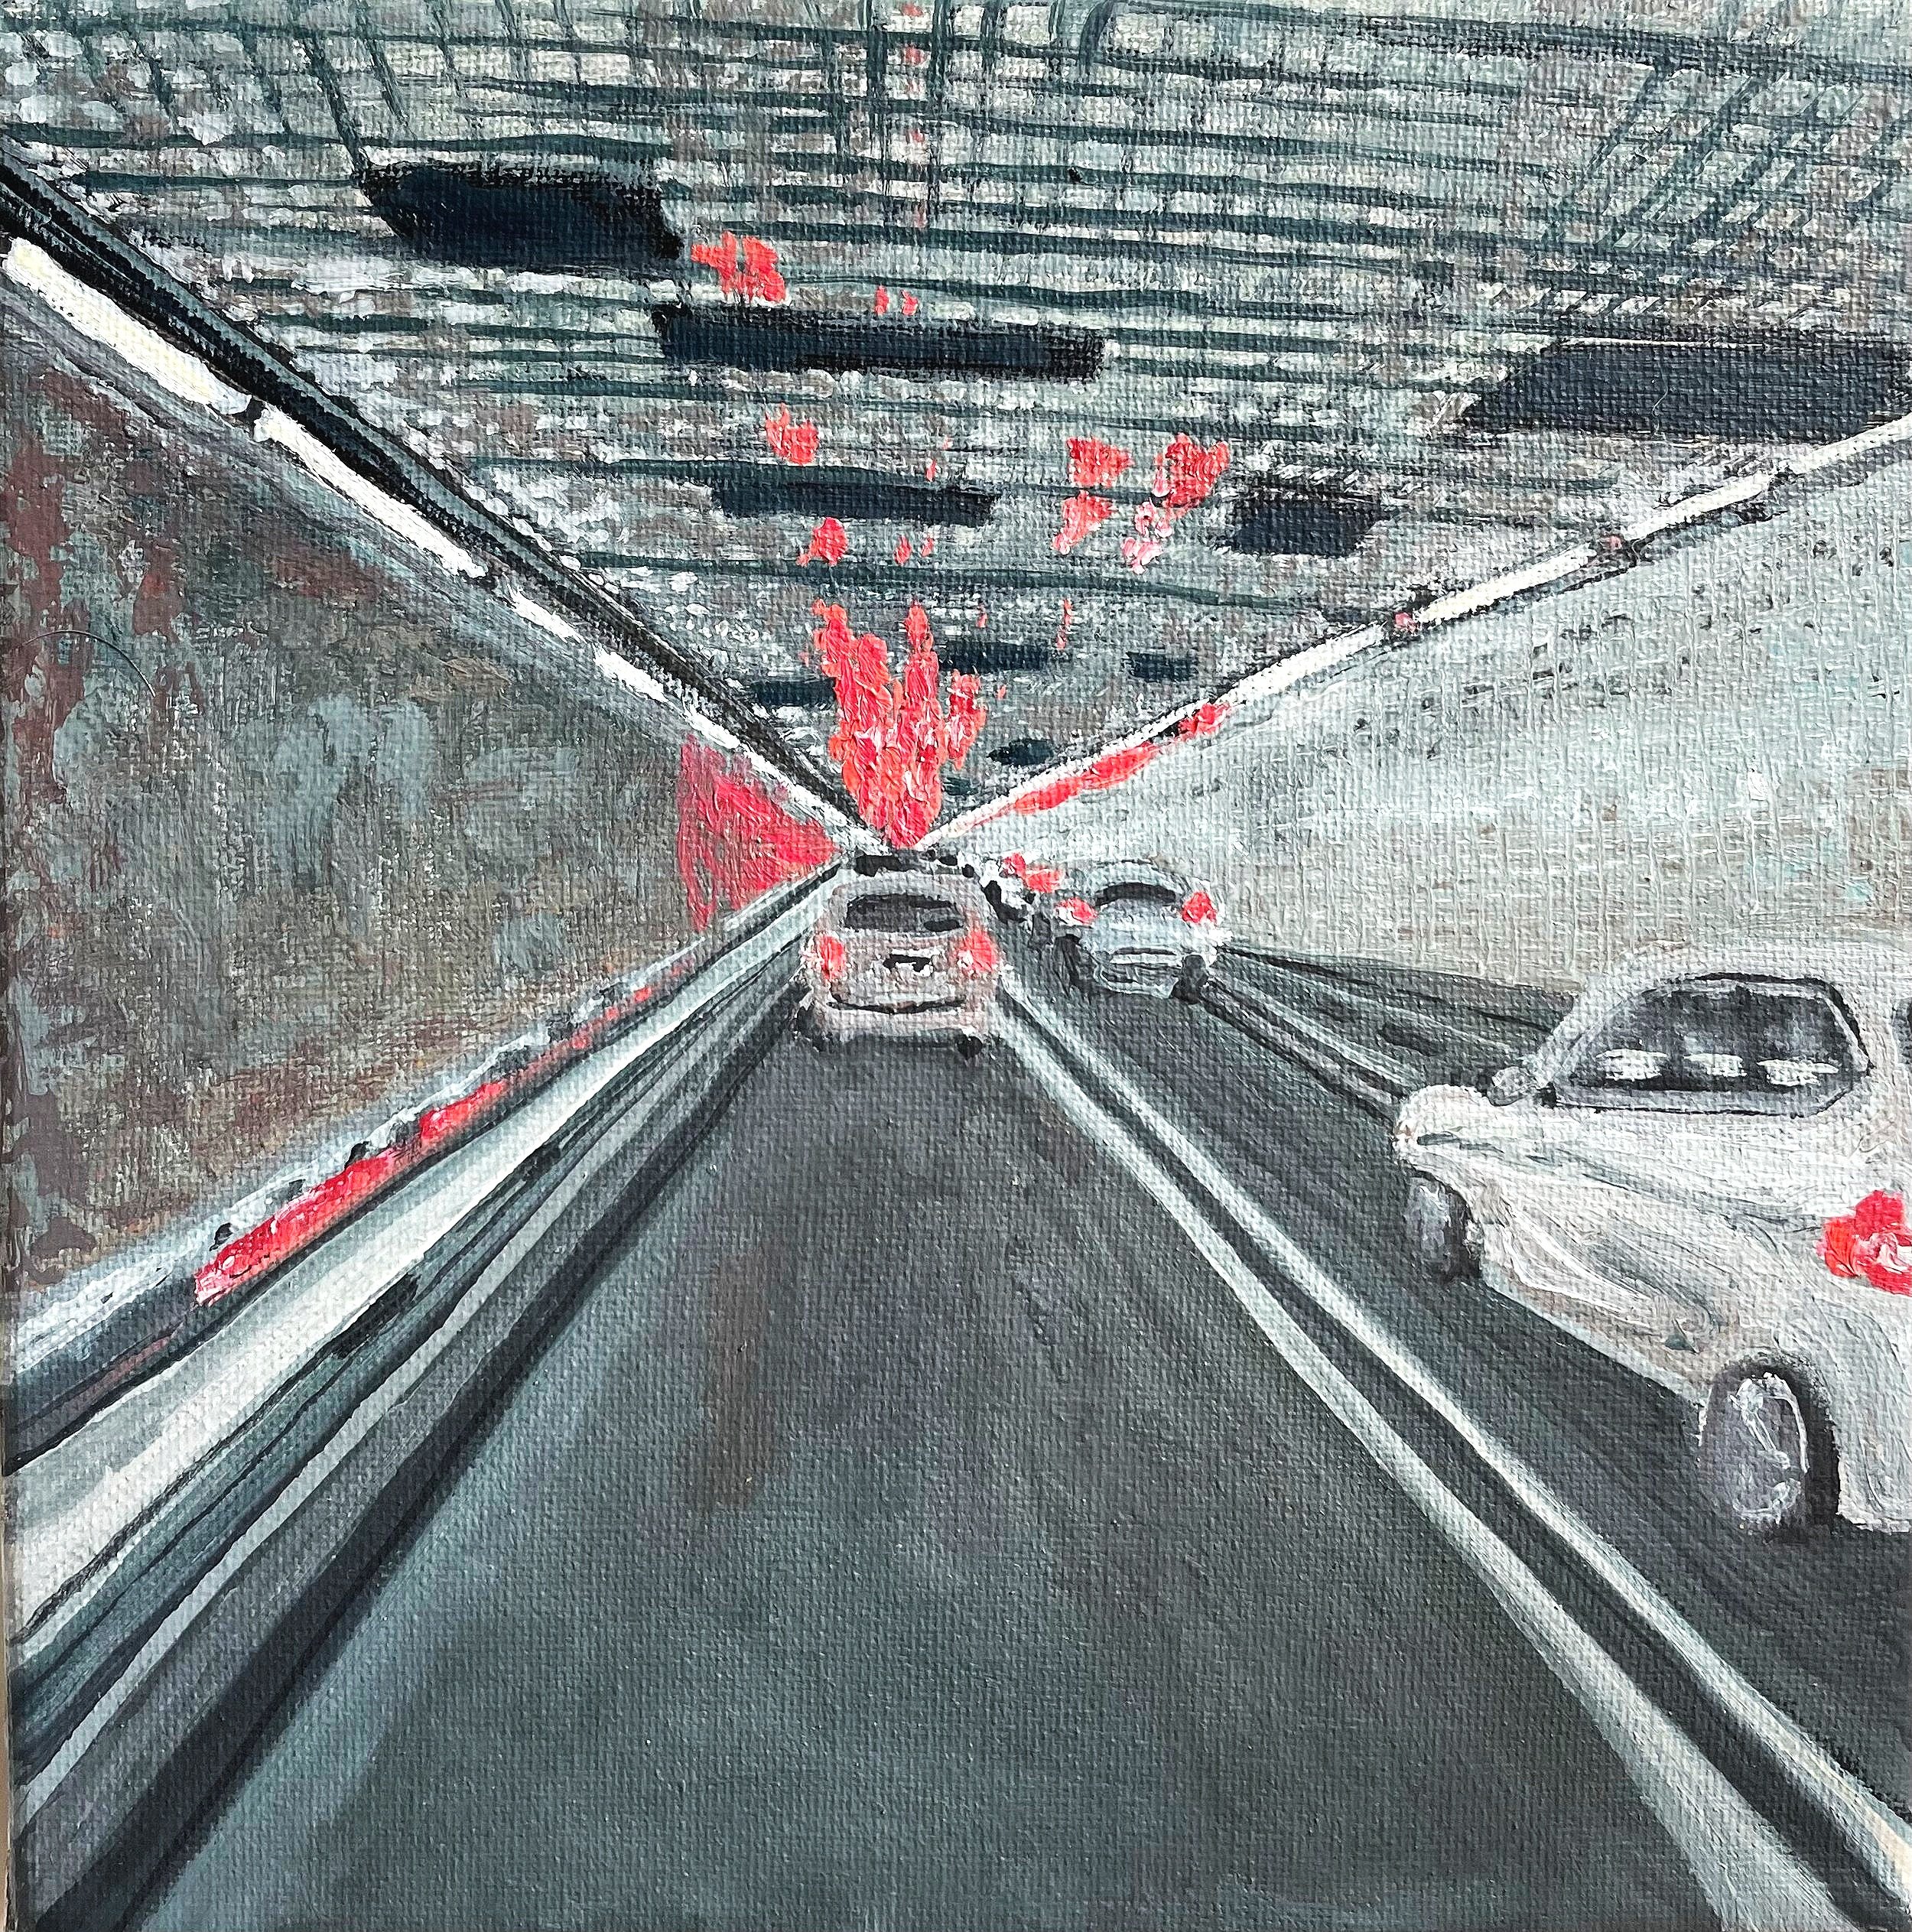   The Trip Home (Battery Tunnel),  Oil on Canvas, 8” x 8”, 2022 